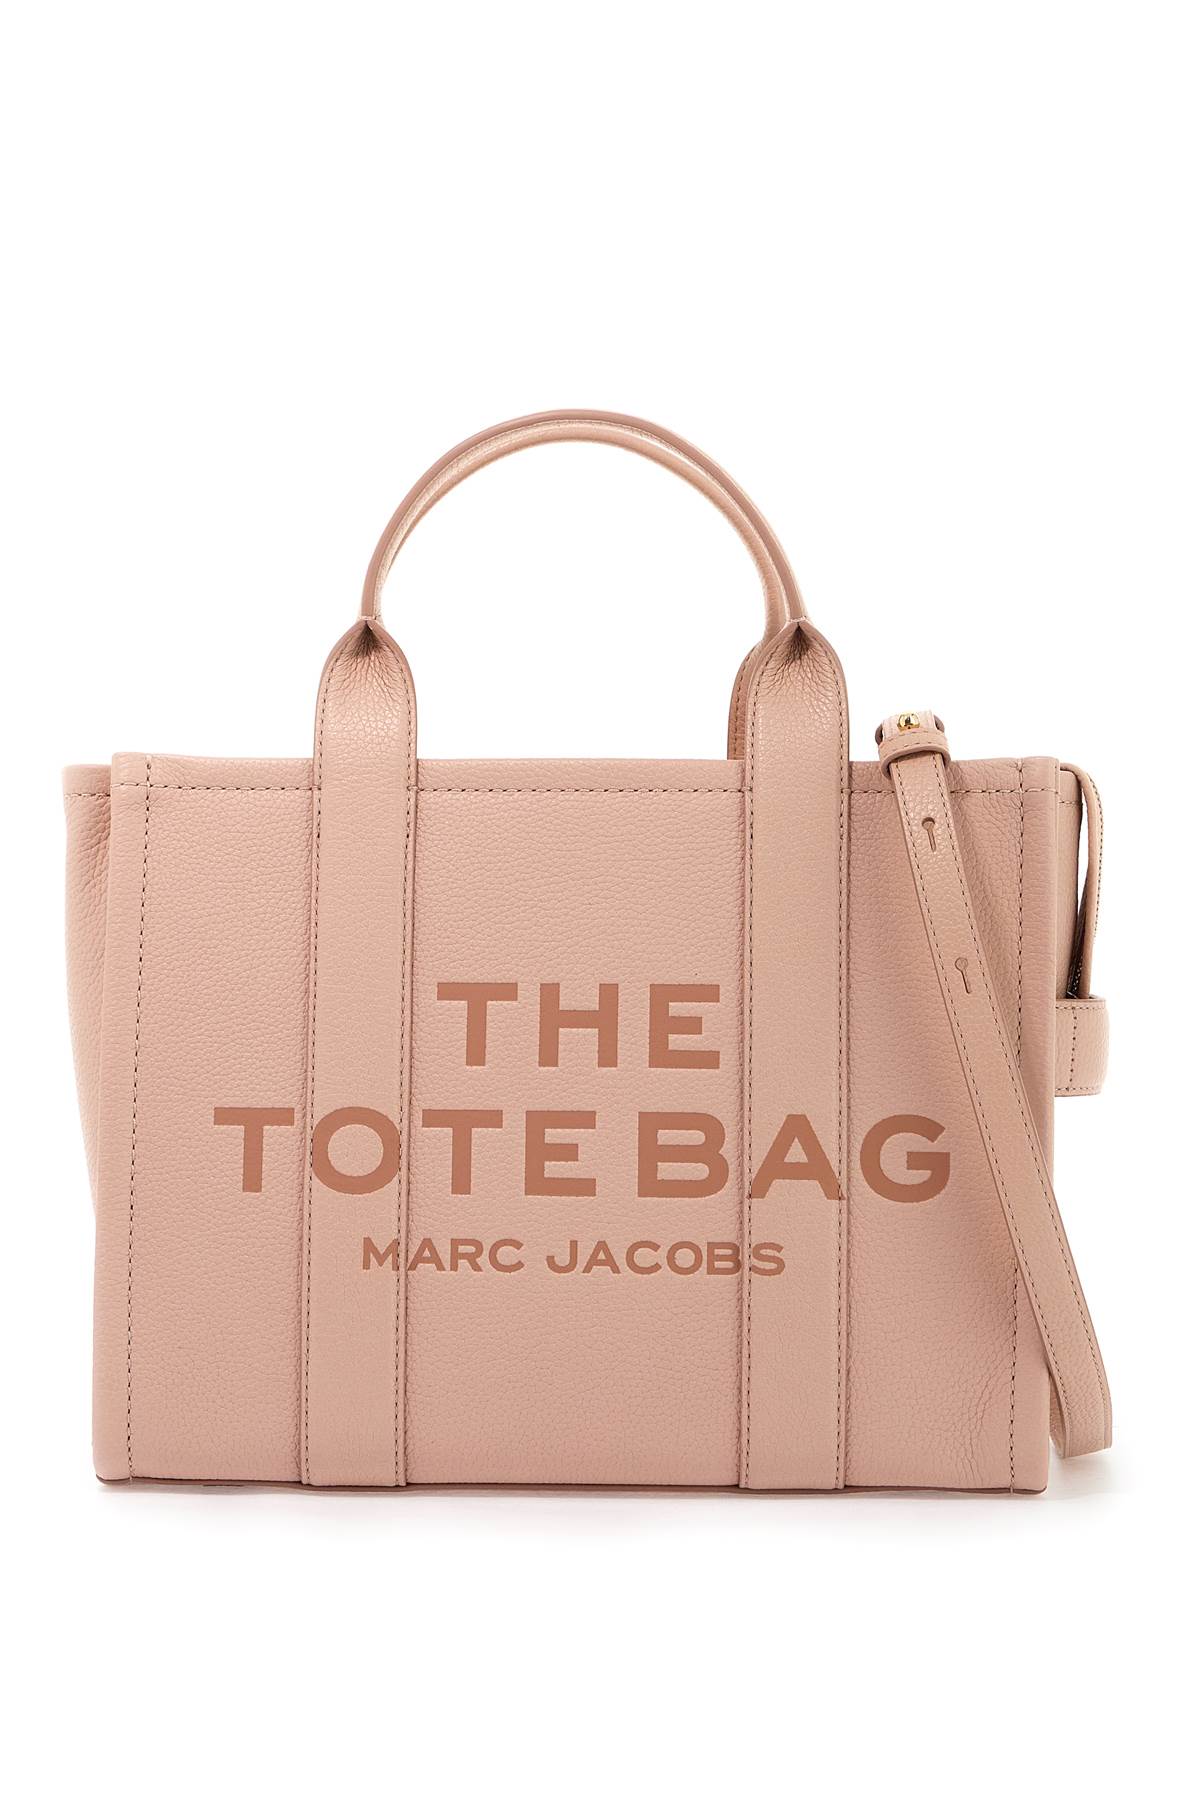 Marc Jacobs MARC JACOBS the leather medium tote bag